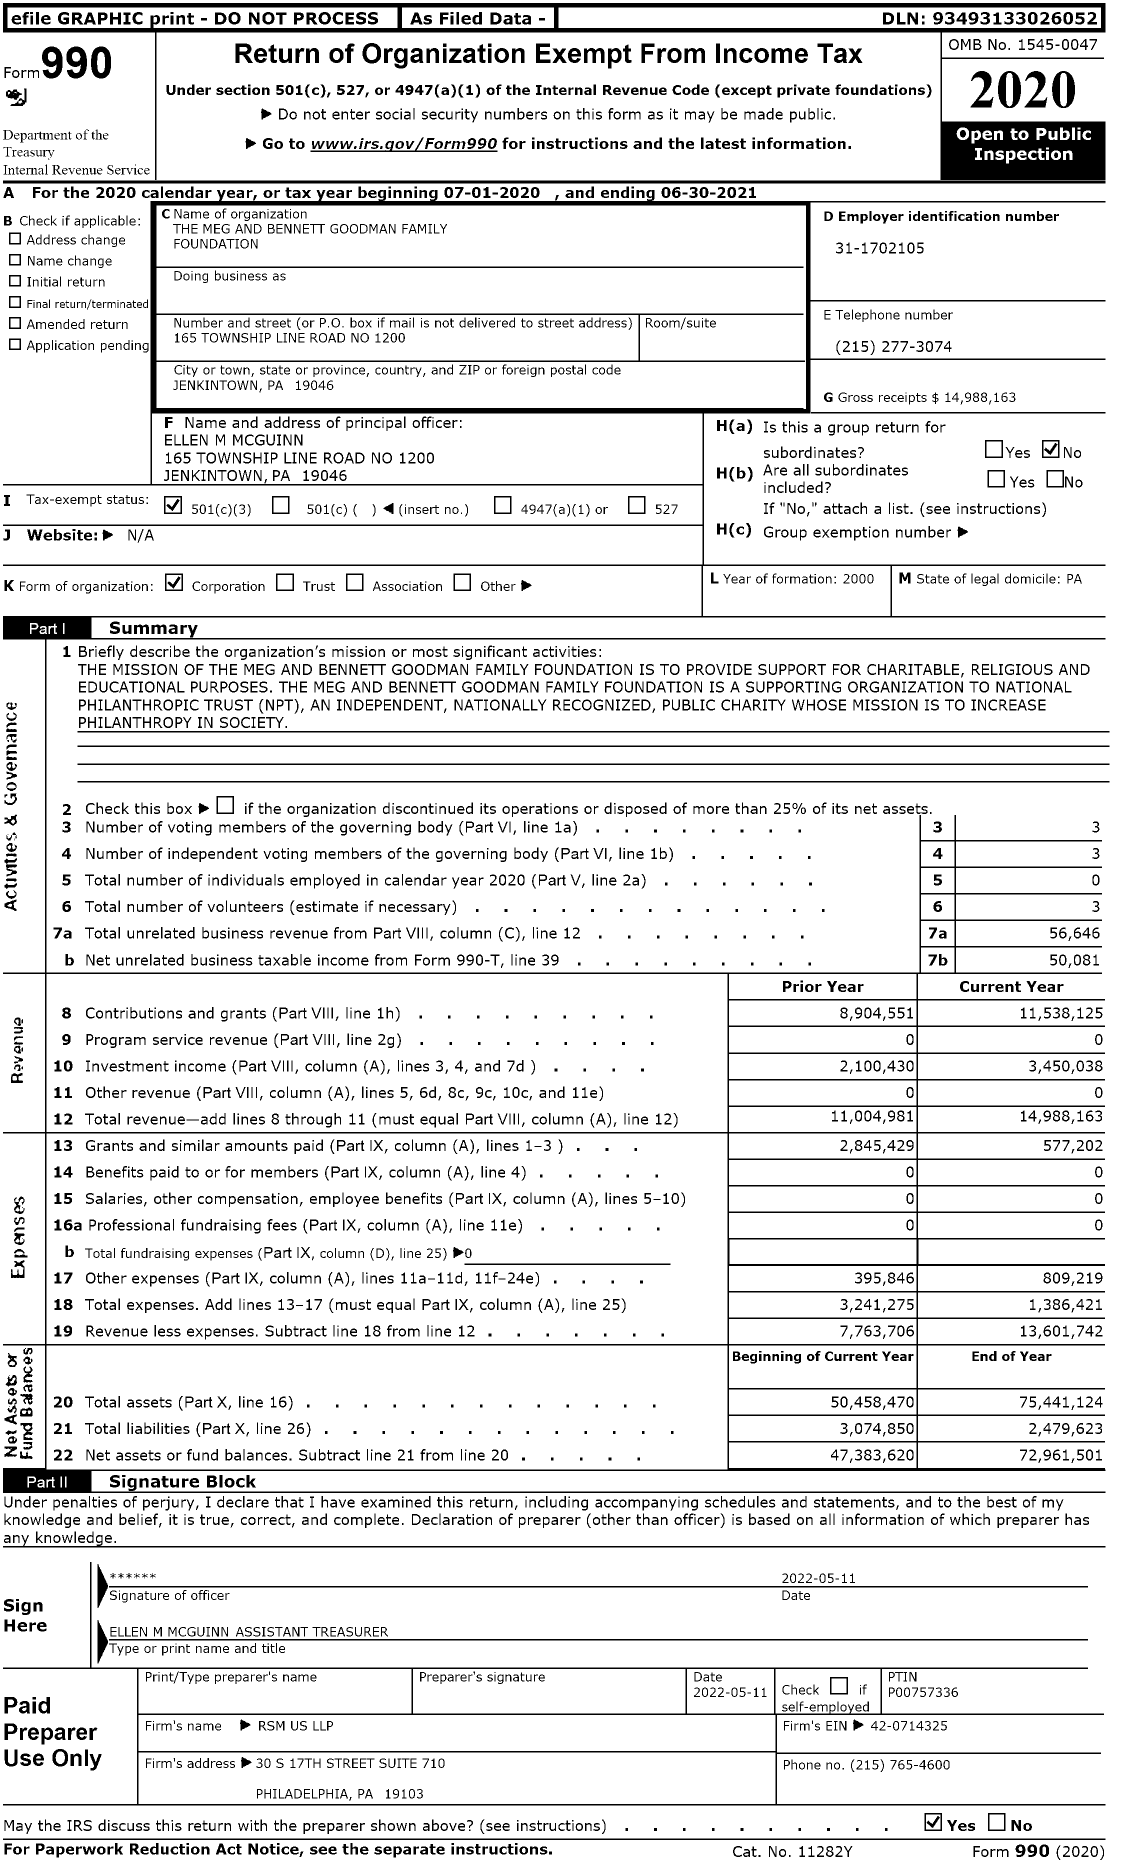 Image of first page of 2020 Form 990 for Meg and Bennett Goodman Family Foundation